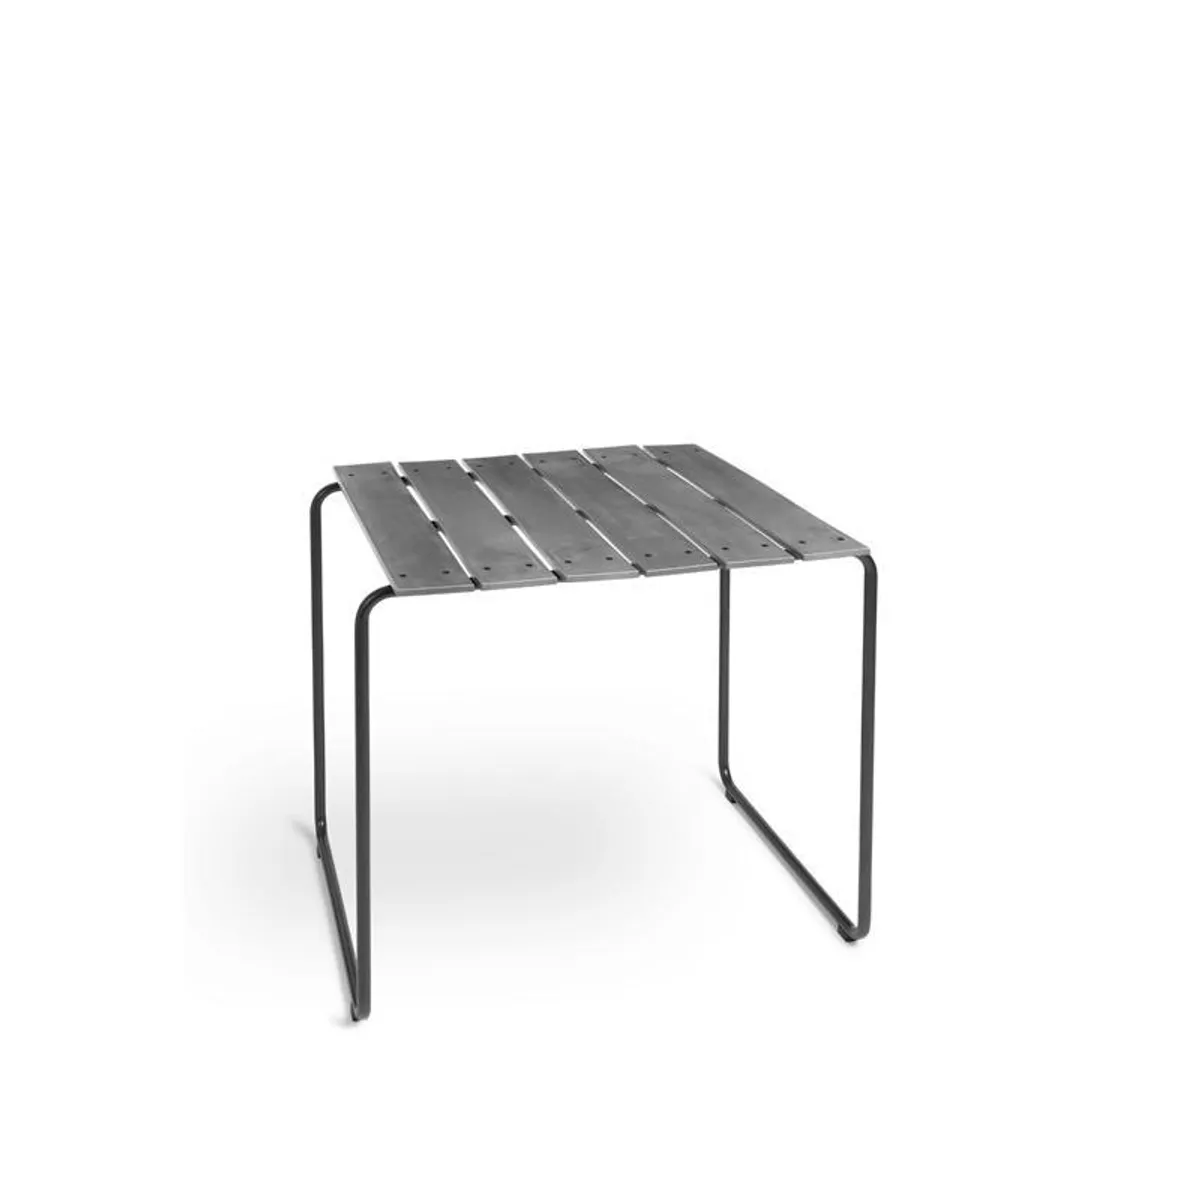 Ocean Table Recycled Plastic Waste With Metal Sled Legs Outdoor Dining Table In Grey Inside Out Contracts